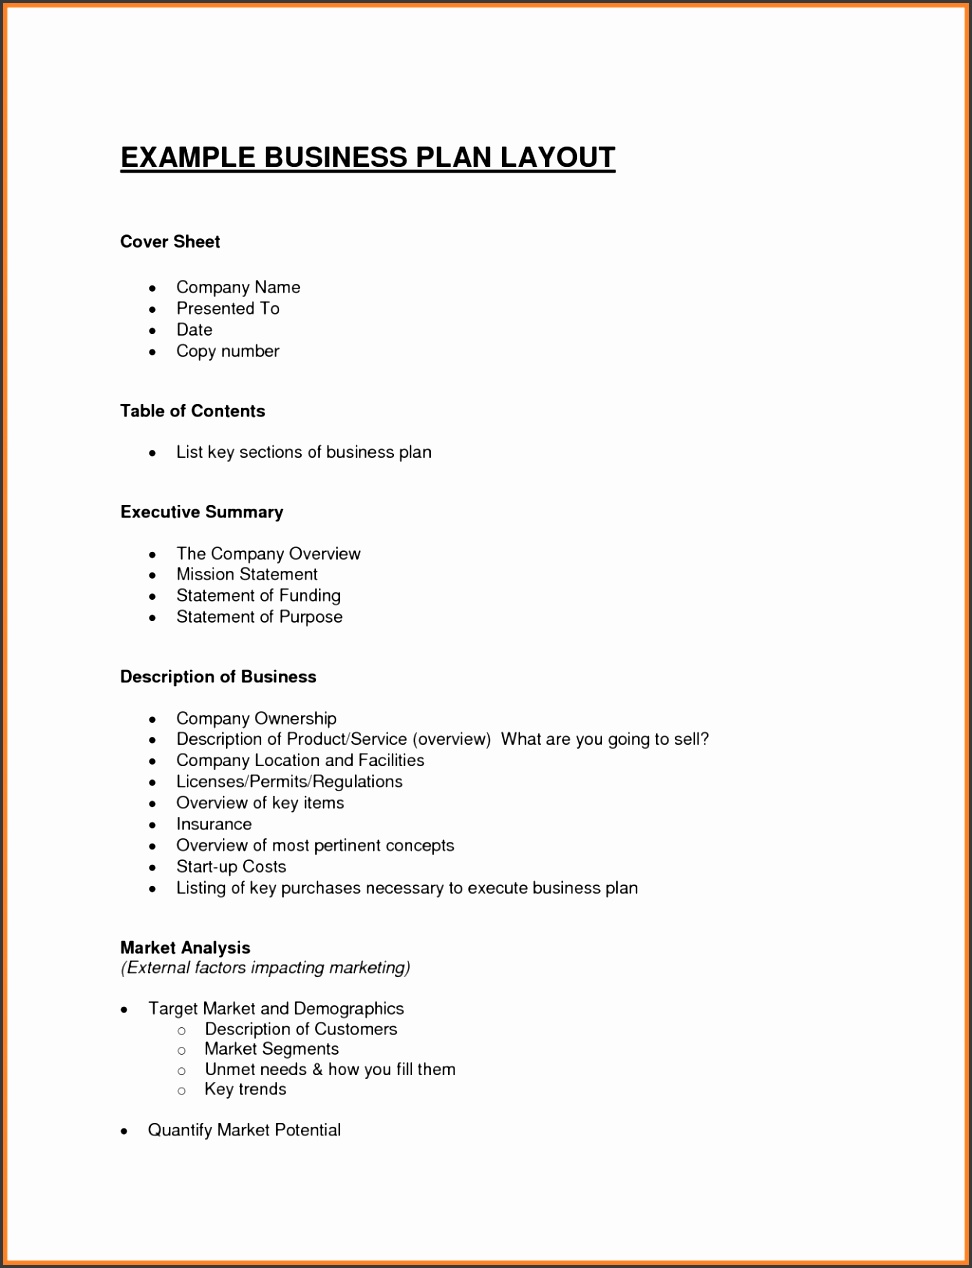 Free Business Plan Outline Template Examples Sample Format With Cover Sheet Feat Table Contents plete Executive Summary Then Description